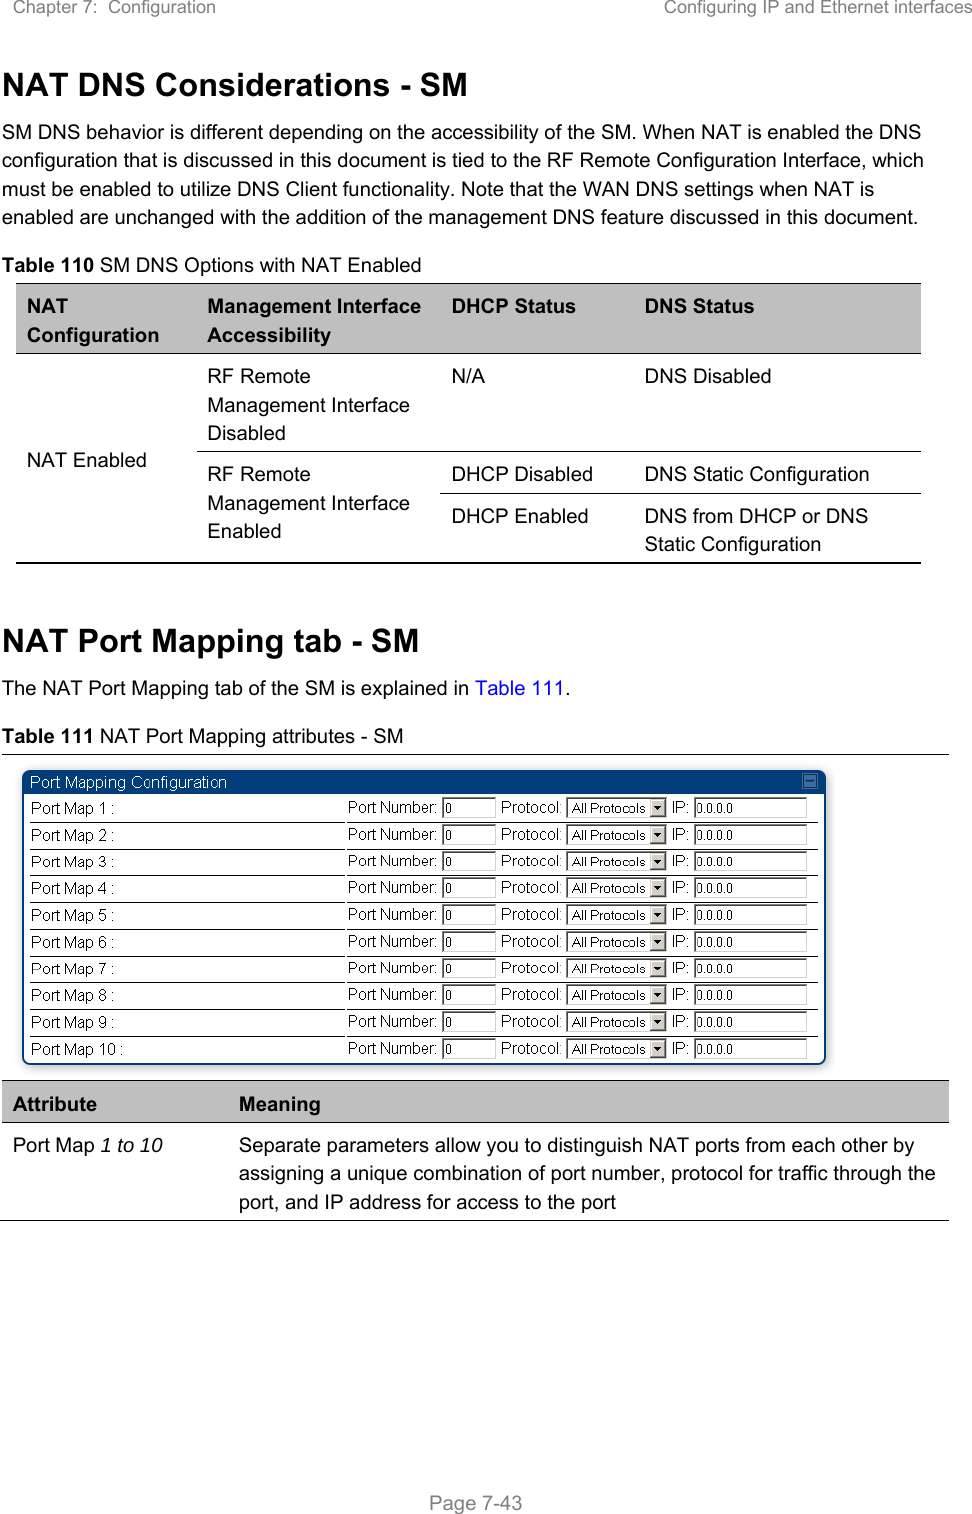 Chapter 7:  Configuration  Configuring IP and Ethernet interfaces   Page 7-43 NAT DNS Considerations - SM SM DNS behavior is different depending on the accessibility of the SM. When NAT is enabled the DNS configuration that is discussed in this document is tied to the RF Remote Configuration Interface, which must be enabled to utilize DNS Client functionality. Note that the WAN DNS settings when NAT is enabled are unchanged with the addition of the management DNS feature discussed in this document.  Table 110 SM DNS Options with NAT Enabled NAT Configuration Management Interface Accessibility DHCP Status  DNS Status NAT Enabled RF Remote Management Interface Disabled N/A  DNS Disabled RF Remote Management Interface Enabled DHCP Disabled  DNS Static Configuration DHCP Enabled  DNS from DHCP or DNS Static Configuration  NAT Port Mapping tab - SM The NAT Port Mapping tab of the SM is explained in Table 111. Table 111 NAT Port Mapping attributes - SM  Attribute  Meaning Port Map 1 to 10  Separate parameters allow you to distinguish NAT ports from each other by assigning a unique combination of port number, protocol for traffic through the port, and IP address for access to the port   